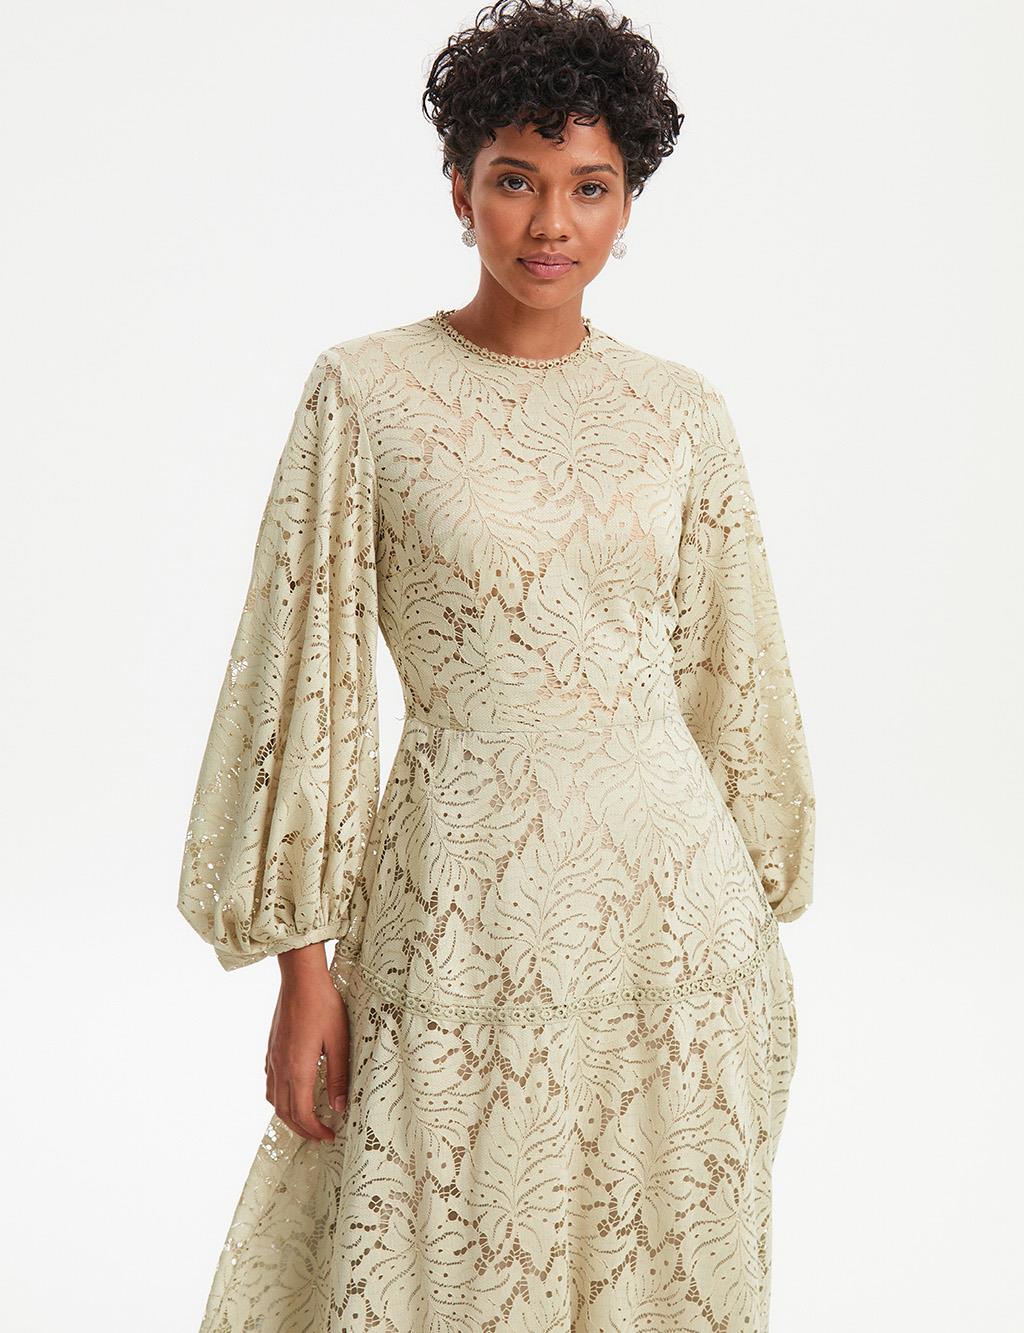 Round Neck Collar Full Length Lace Dress Misty Green